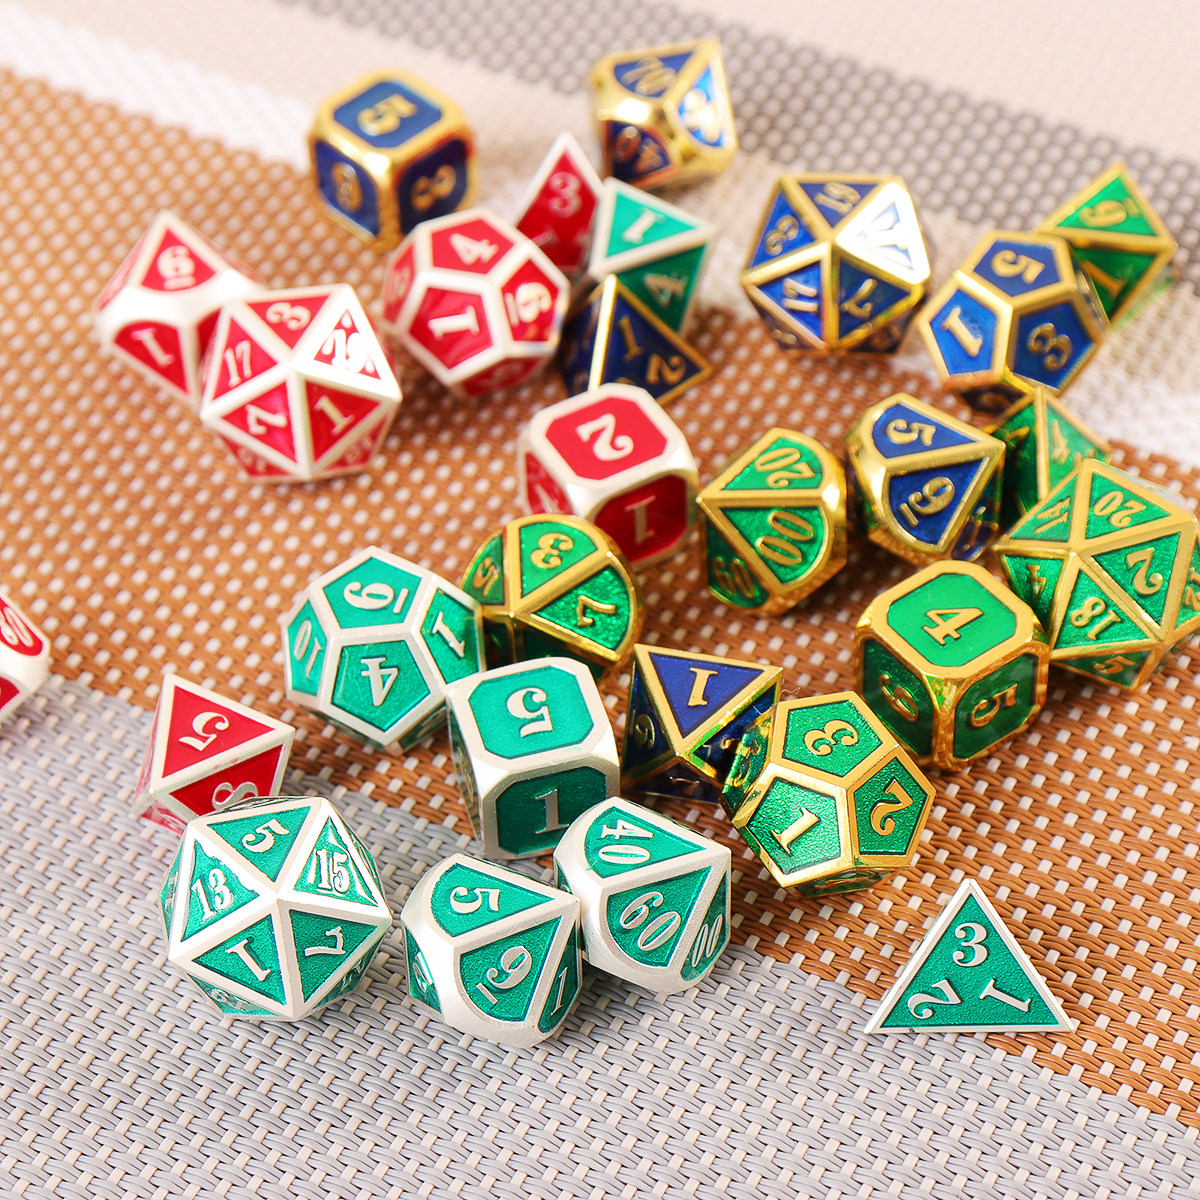 7Pcs-Heavy-Duty-Metal-Polyhedral-Dices-Set-Multisided-Dice-Antique-RPG-Role-Playing-Game-Dices-1371263-1